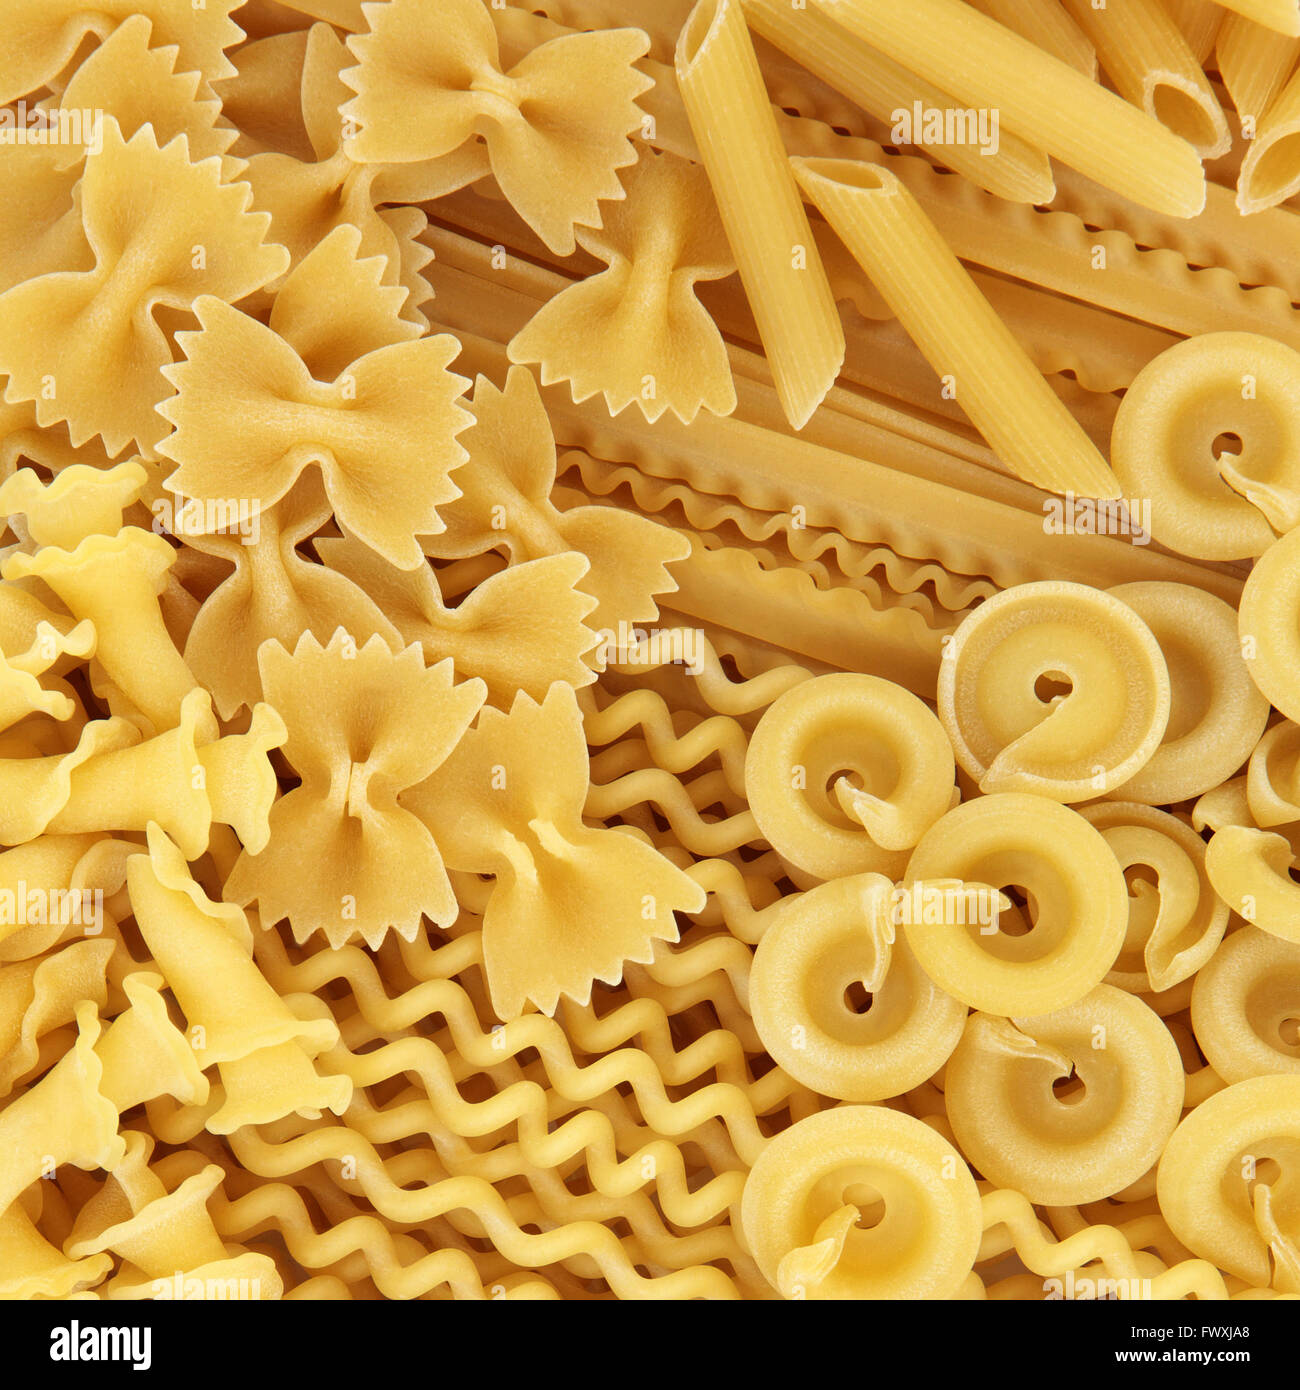 Italian pasta selection forming an abstract background. Stock Photo